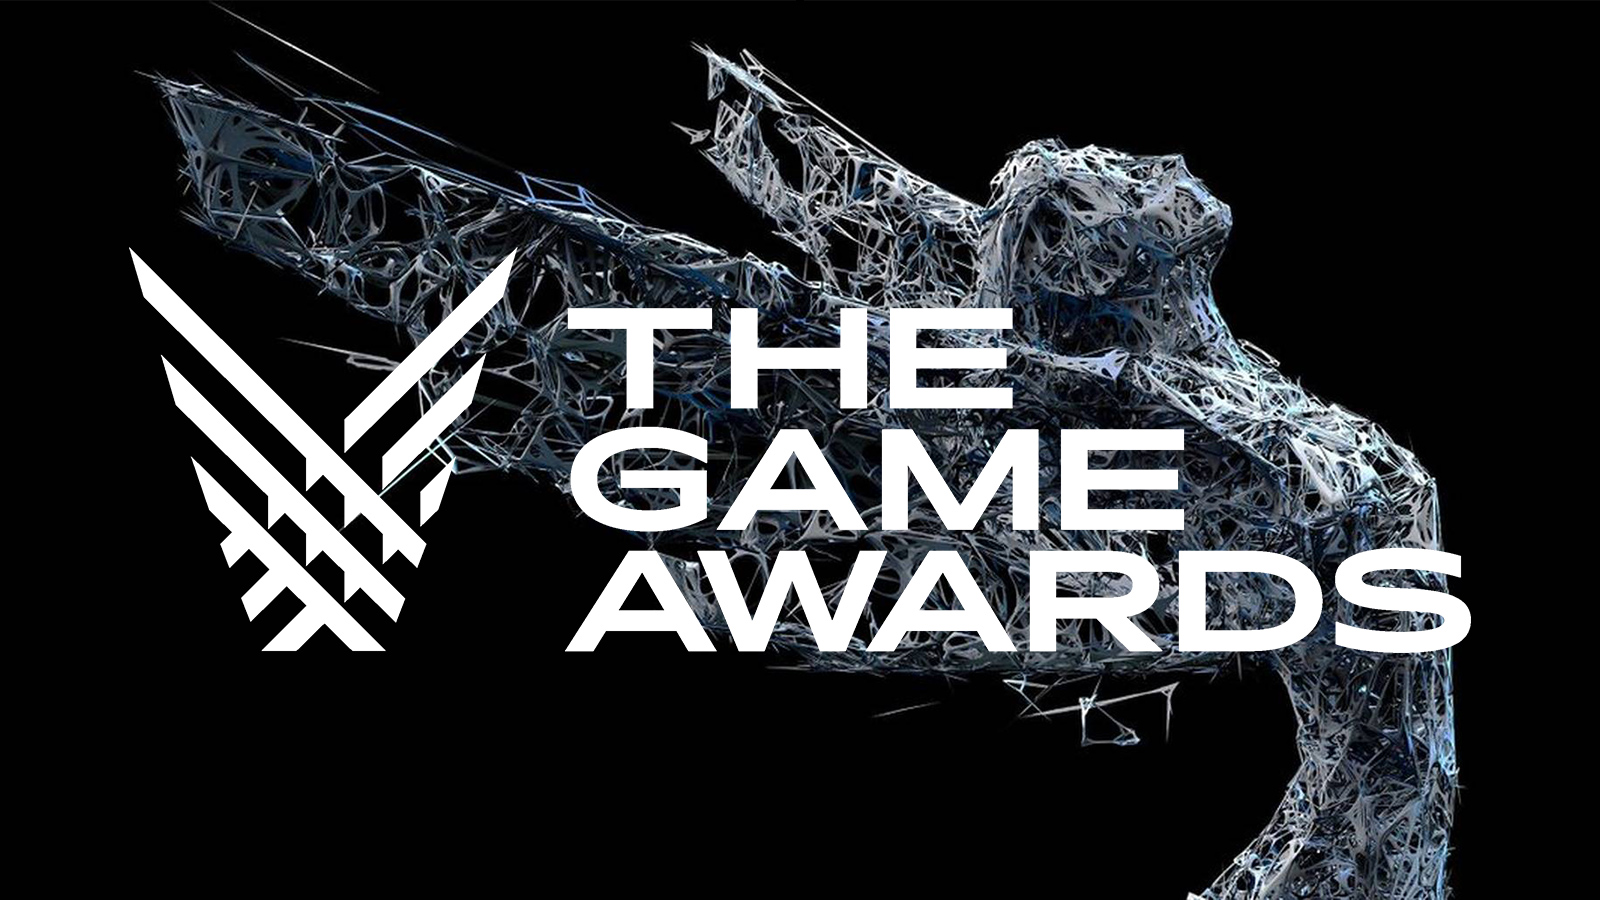 Special Fortnite announcement set for The Game Awards 2019 - Dexerto